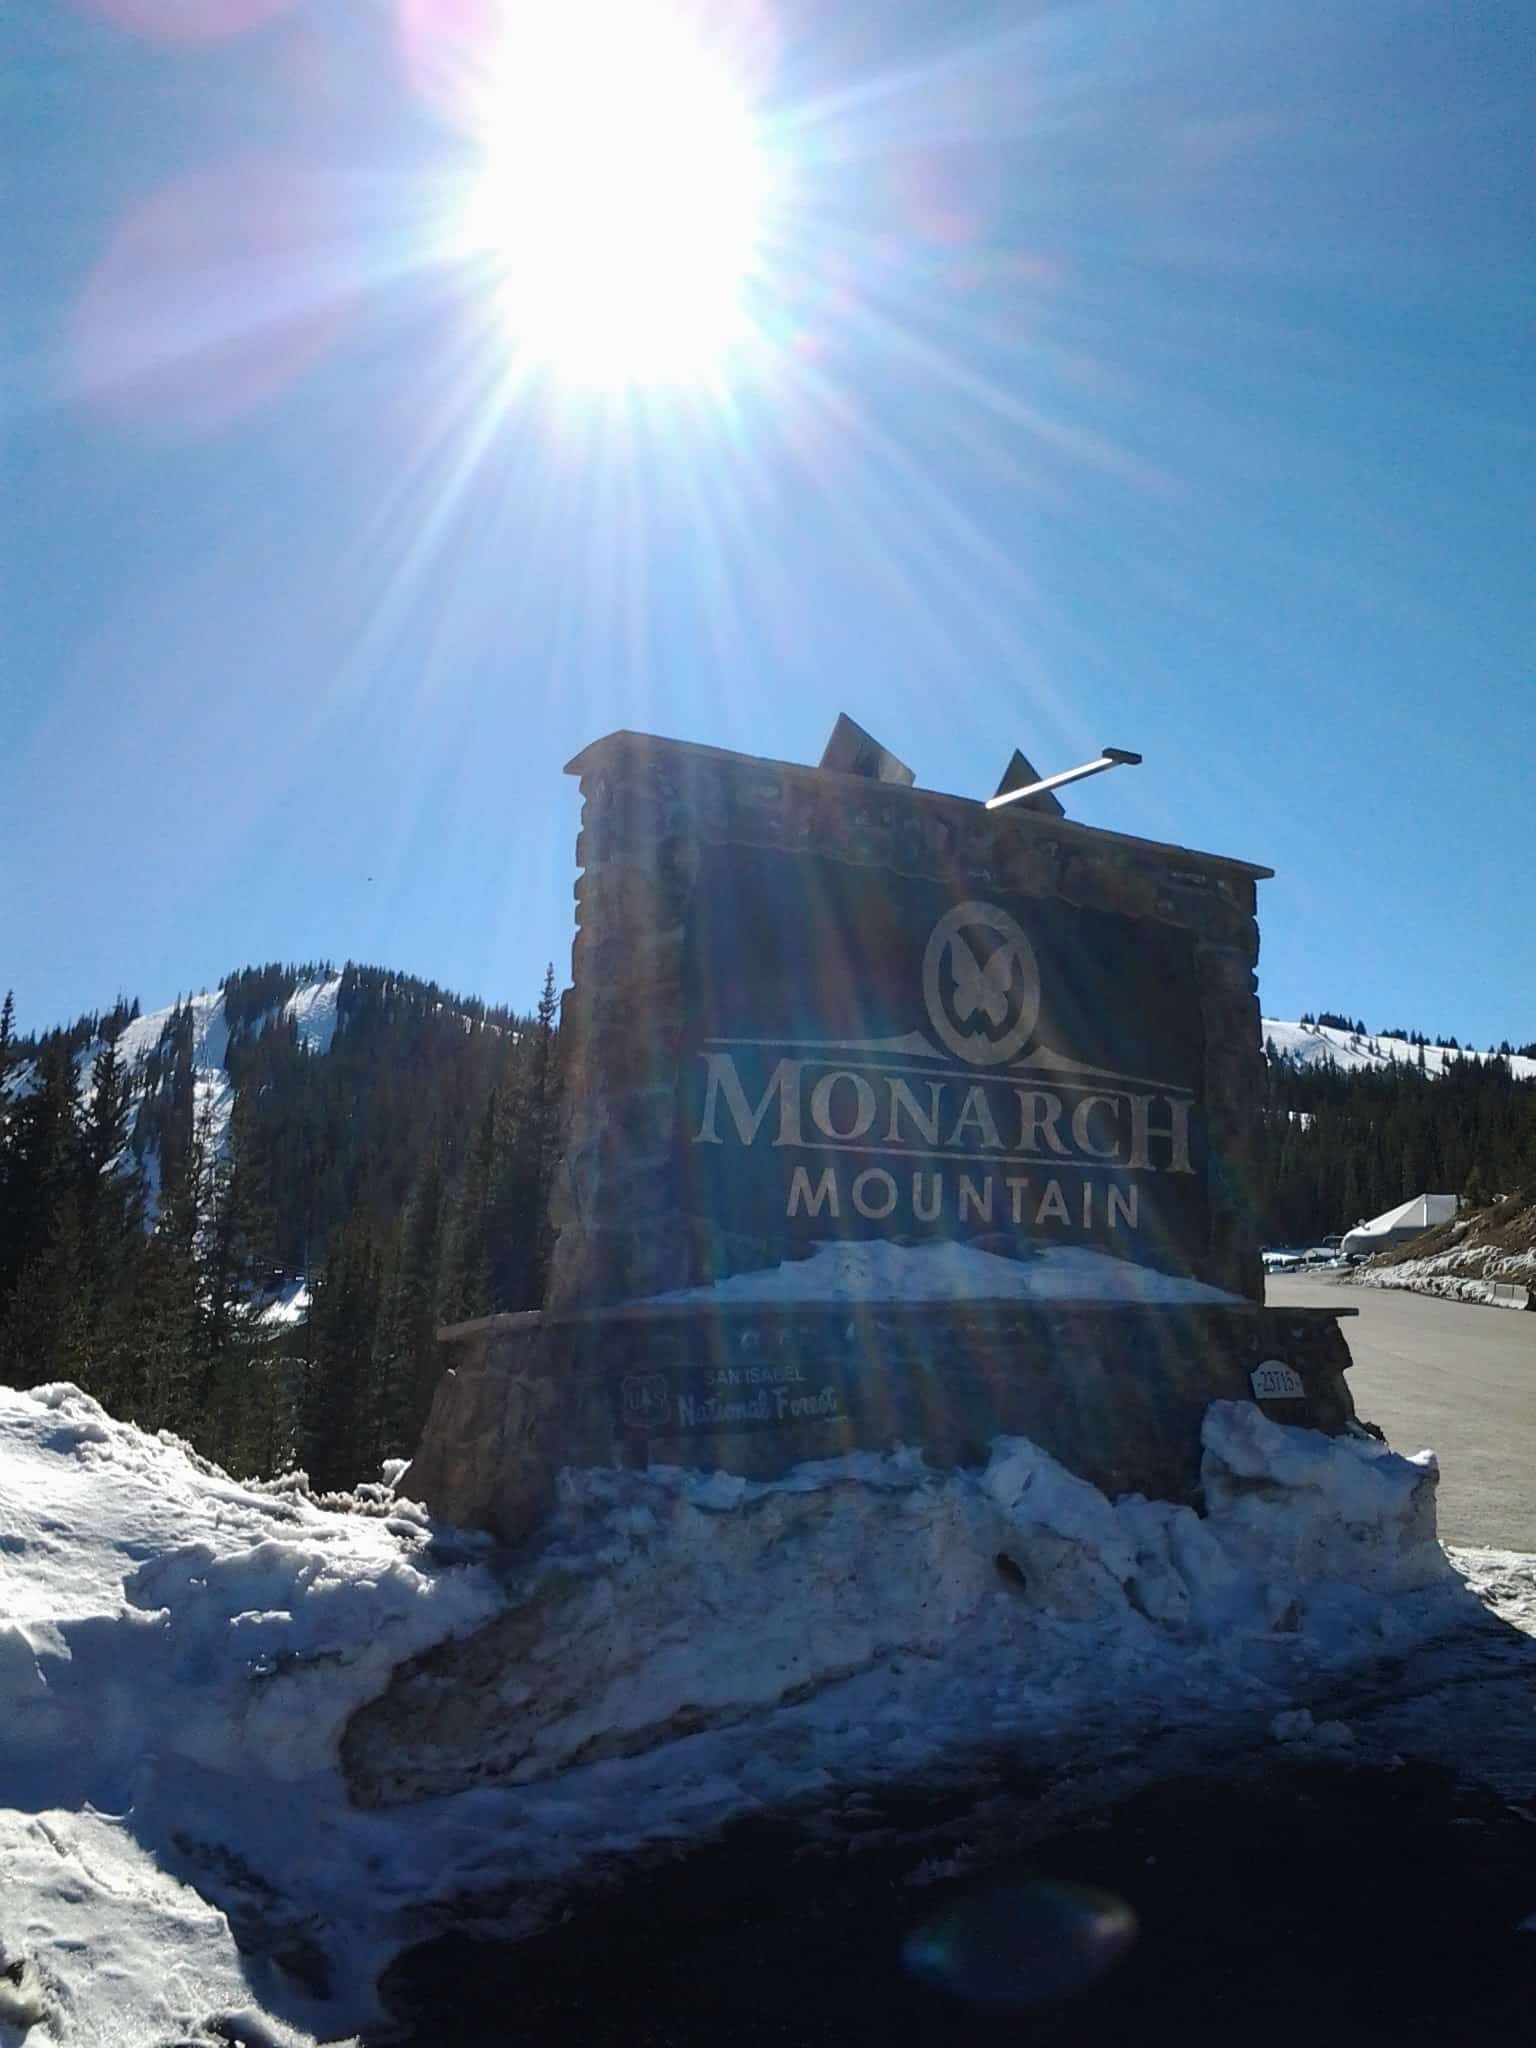 Sun shinning above the Monarch Mountain entrance sign, with the ski area in the distance all covered in snow